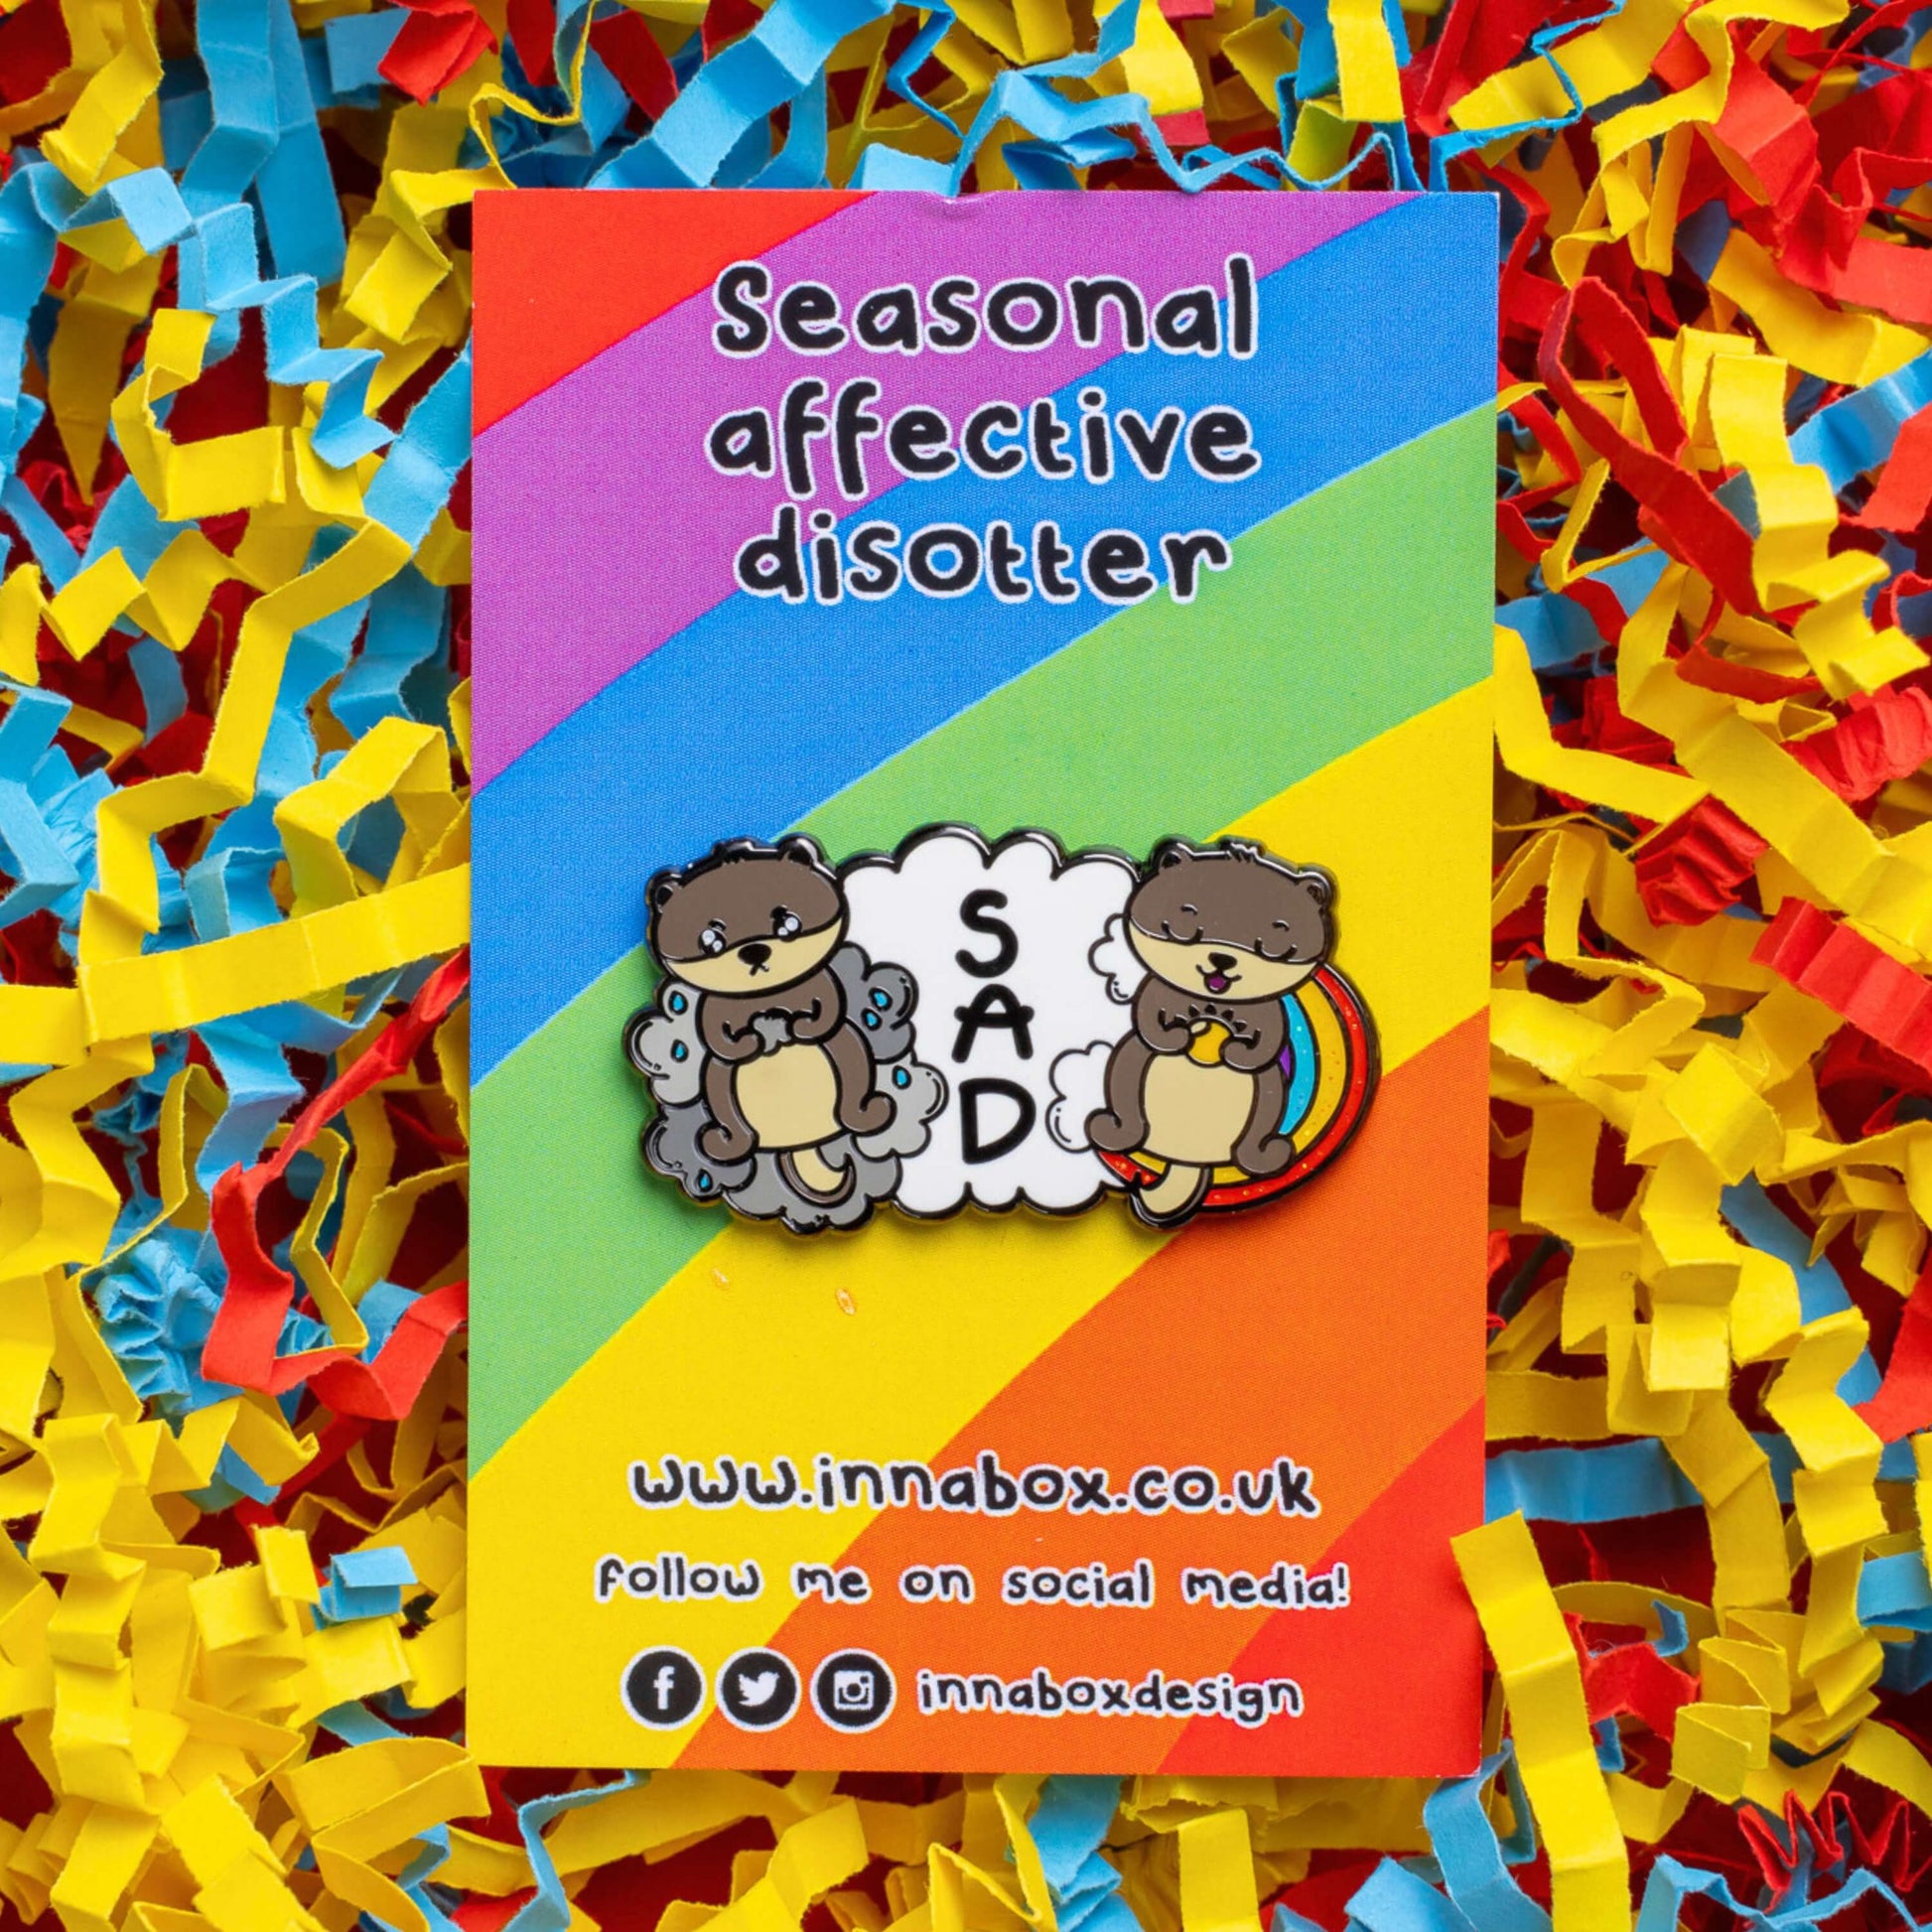 The Seasonal Affective Otter Enamel Pin - Seasonal Affective Disorder SAD on rainbow backing card laid on a red, yellow and blue card confetti background. The cloud shaped pin has two otters on either side, one sad on a raincloud clutching a raincloud and the other smiling on a rainbow clutching a sunshine. In the middle is the initials 'SAD'. The hand drawn design is raising awareness for Seasonal Affective Disorder.